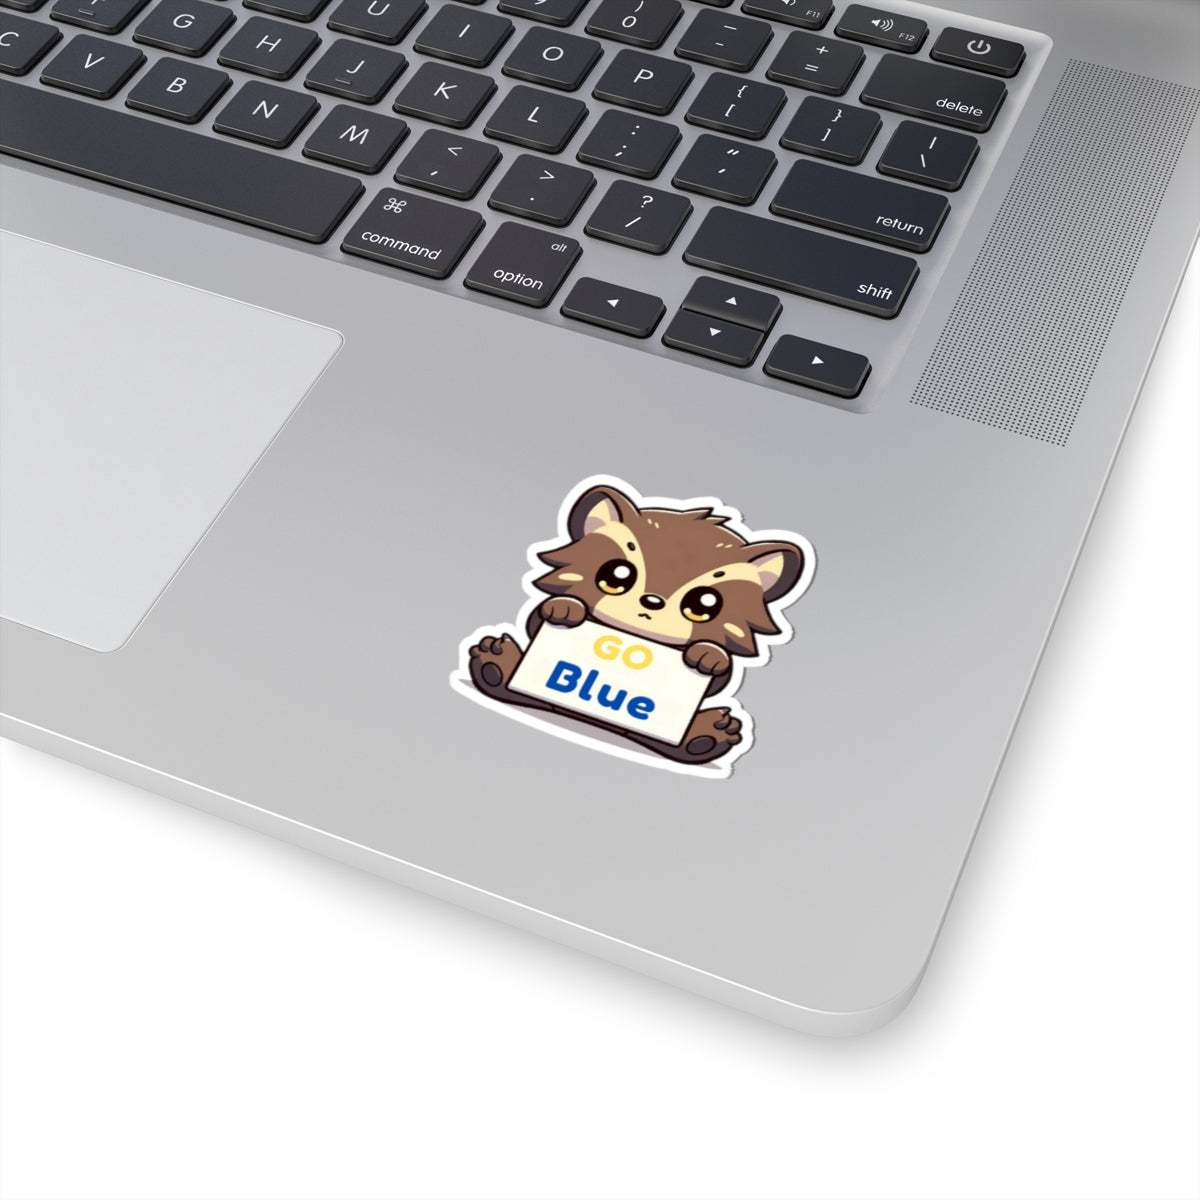 Inspiring Cute Wolverine vinyl Sticker: Go Blue! UM for laptop, kindle, phone, ipad, instrument case, notebook, mood board, or wall